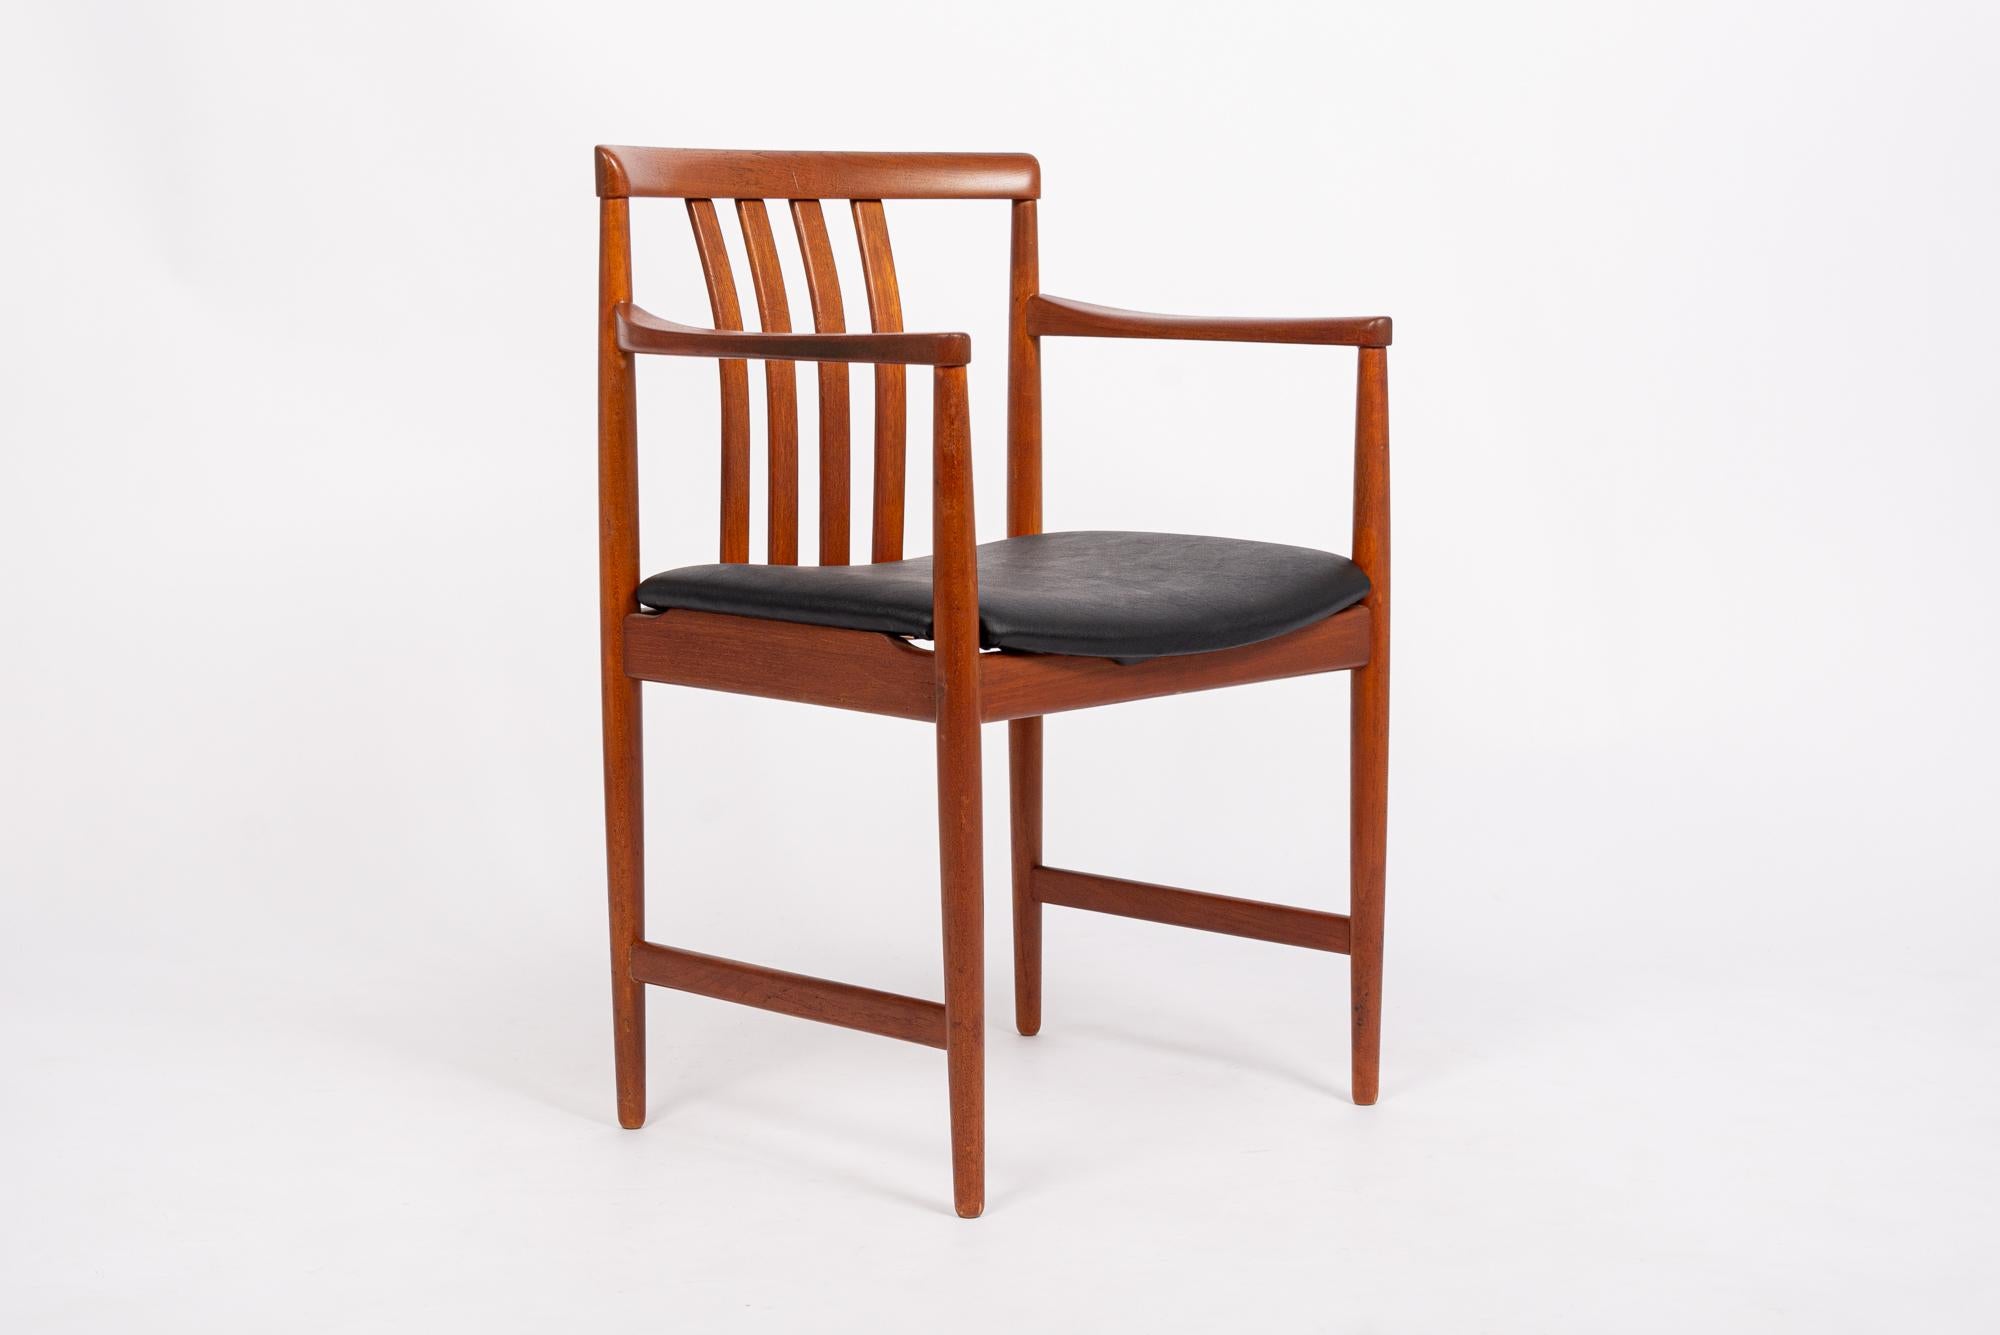 This vintage mid century modern arm chair was made in Norway by Westnofa circa 1968. The elegant Scandinavian design features clean, minimalist lines and gentle curves. The chair is well-constructed with a solid teak wood frame and simple black